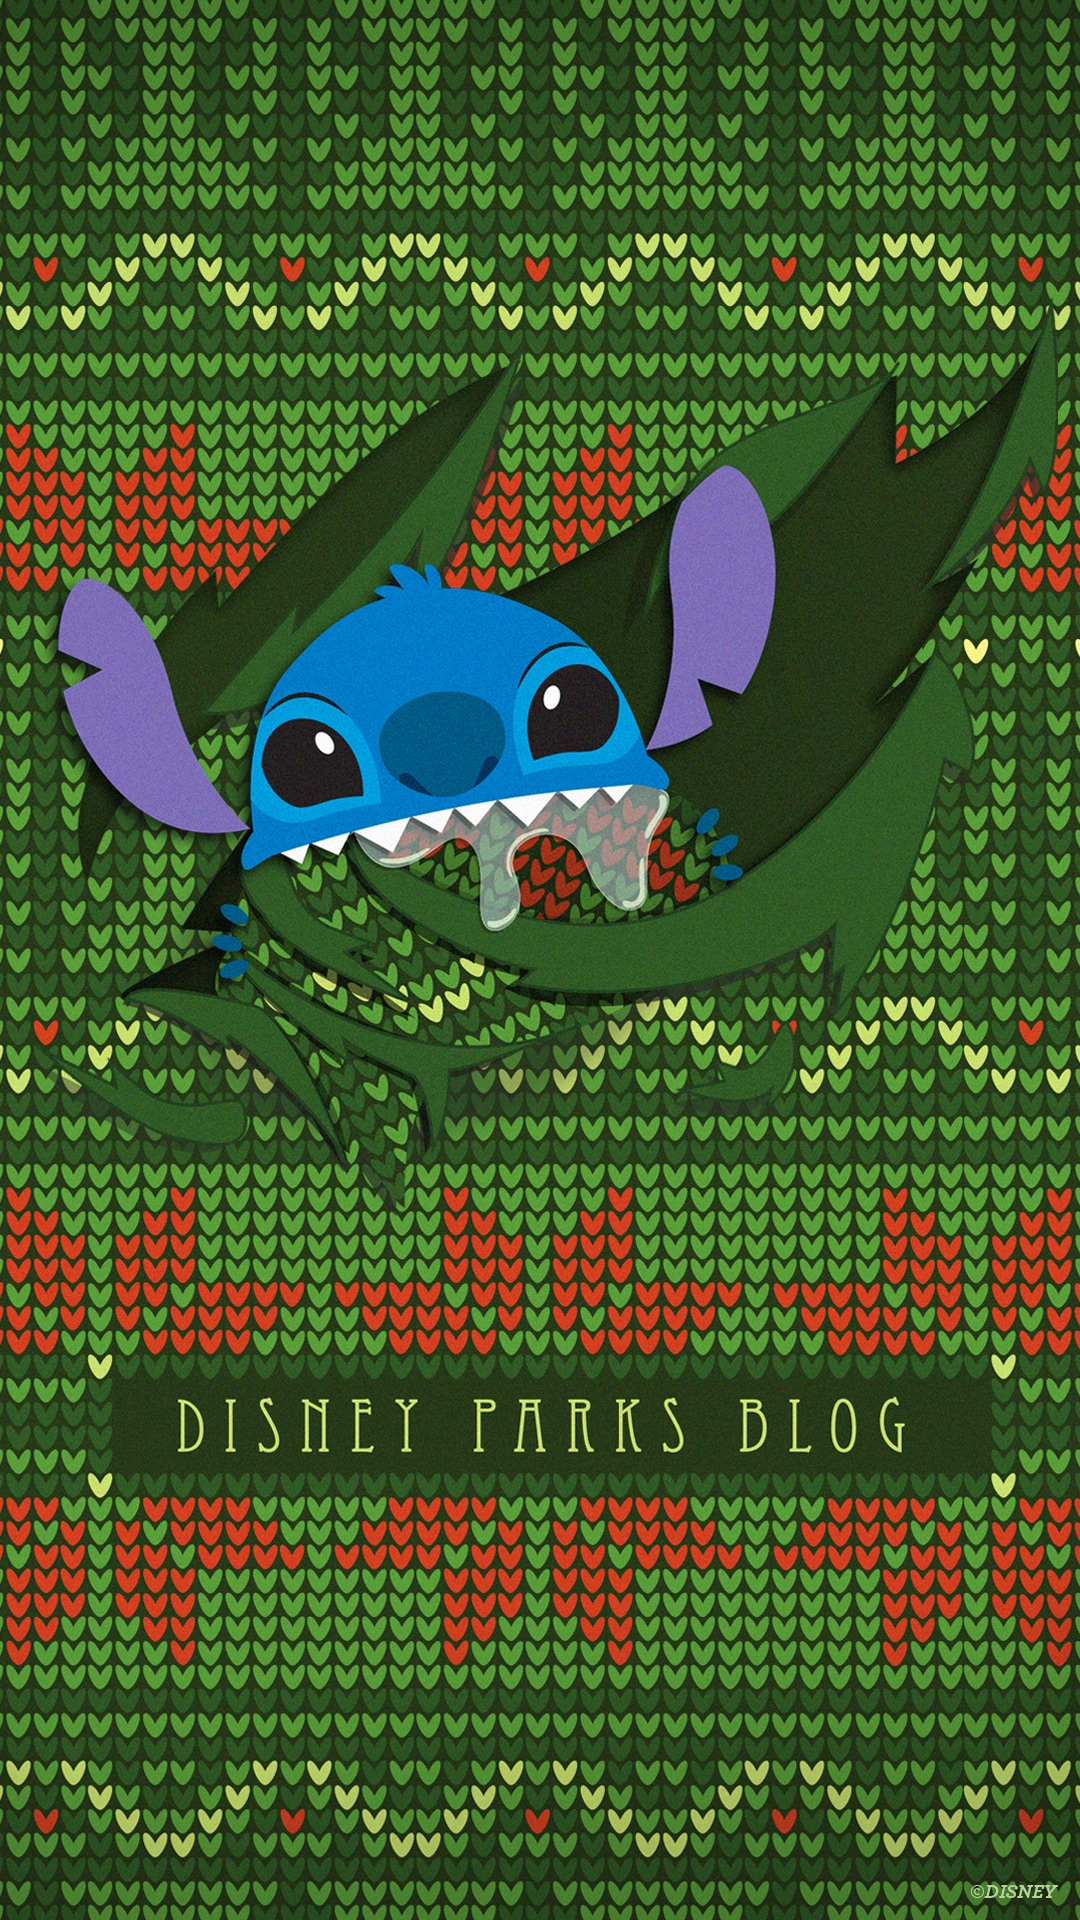 Ugly Christmas Sweater Wallpaper featuring Stitch – Mobile | Disney Parks  Blog